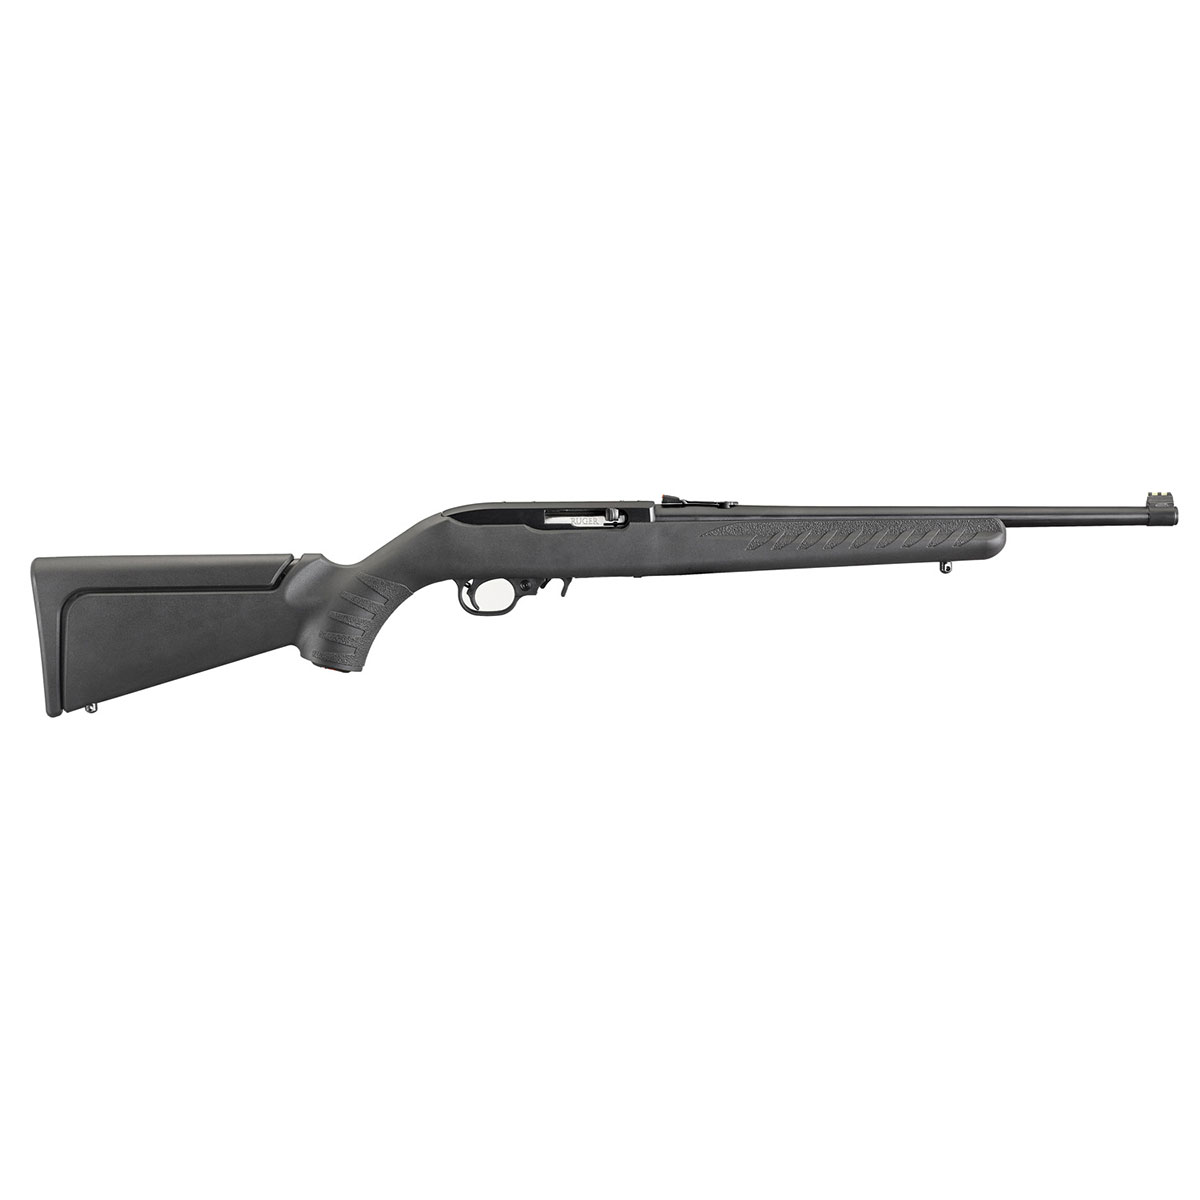 RUGER - 10/22® COMPACT 22 LONG RIFLE SEMI-AUTO RIFLE